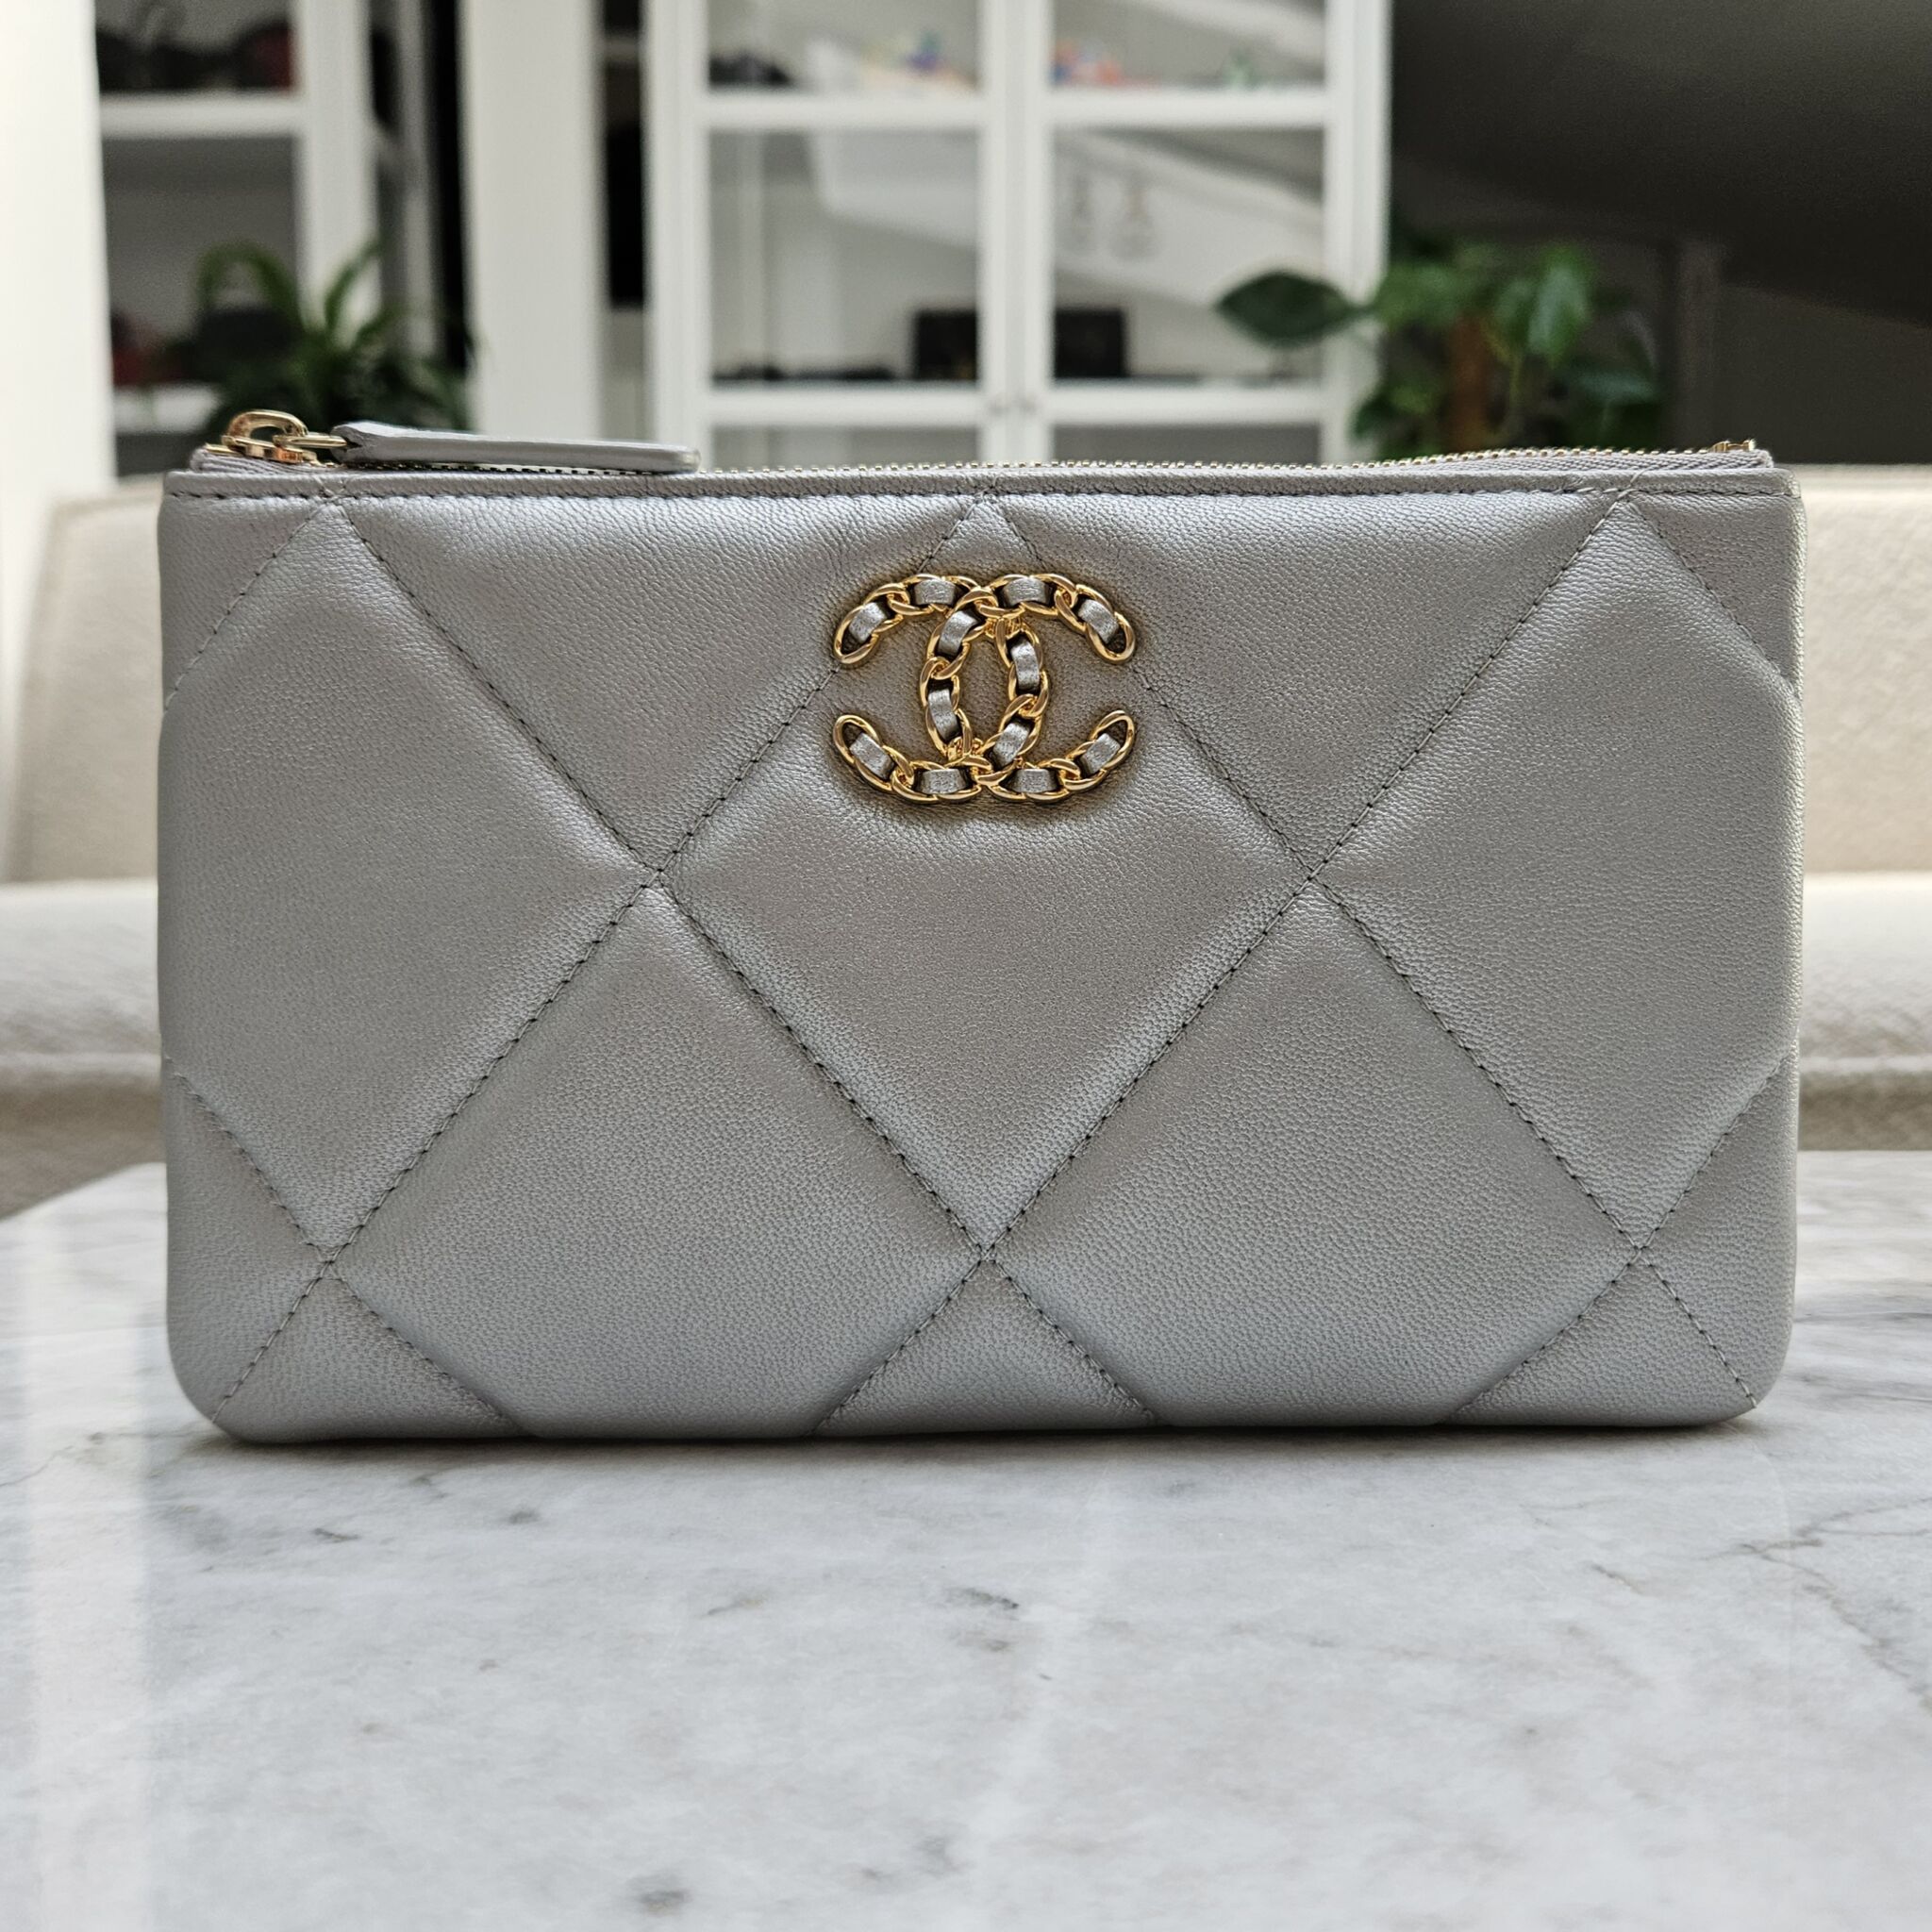 Chanel Small 19 Pouch, Lambskin, Silver GHW - Laulay Luxury